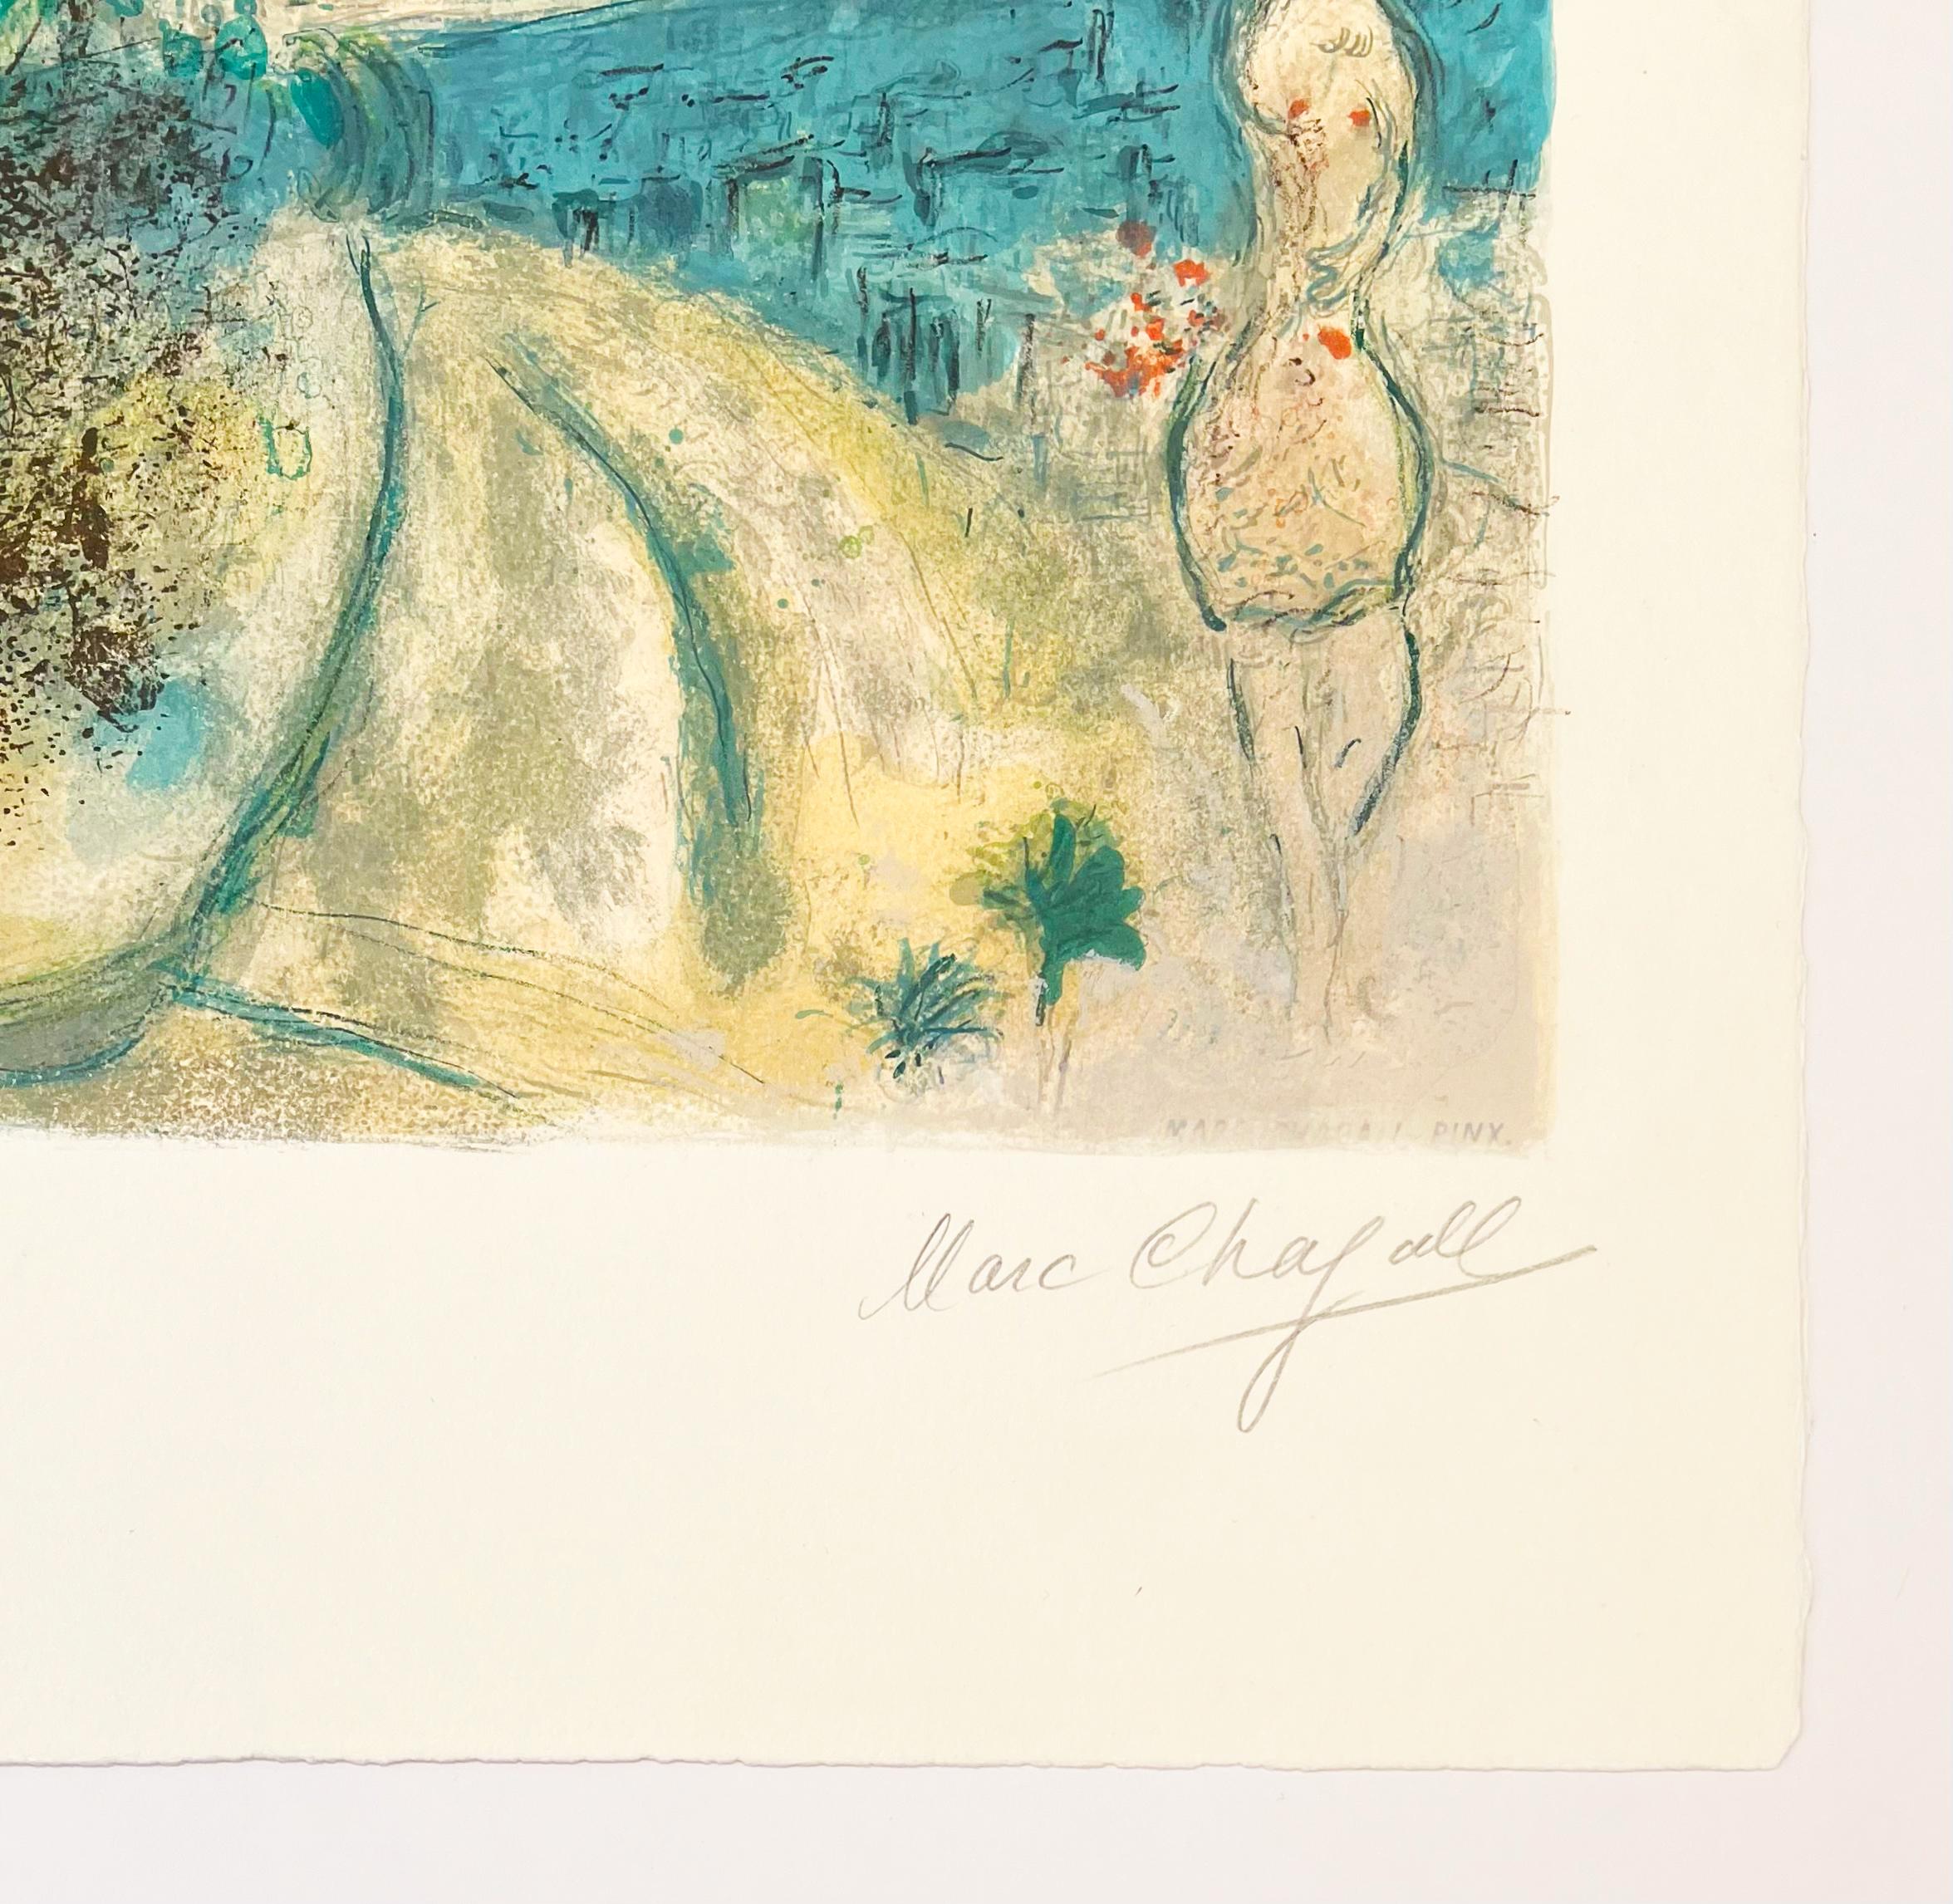 Artist: Marc Chagall (after)
Title: Roses and Mimosa
Portfolio: Nice and the Cote d'Azur
Medium: Lithograph
Date: 1967
Edition: 149/150
Sheet Size: 29